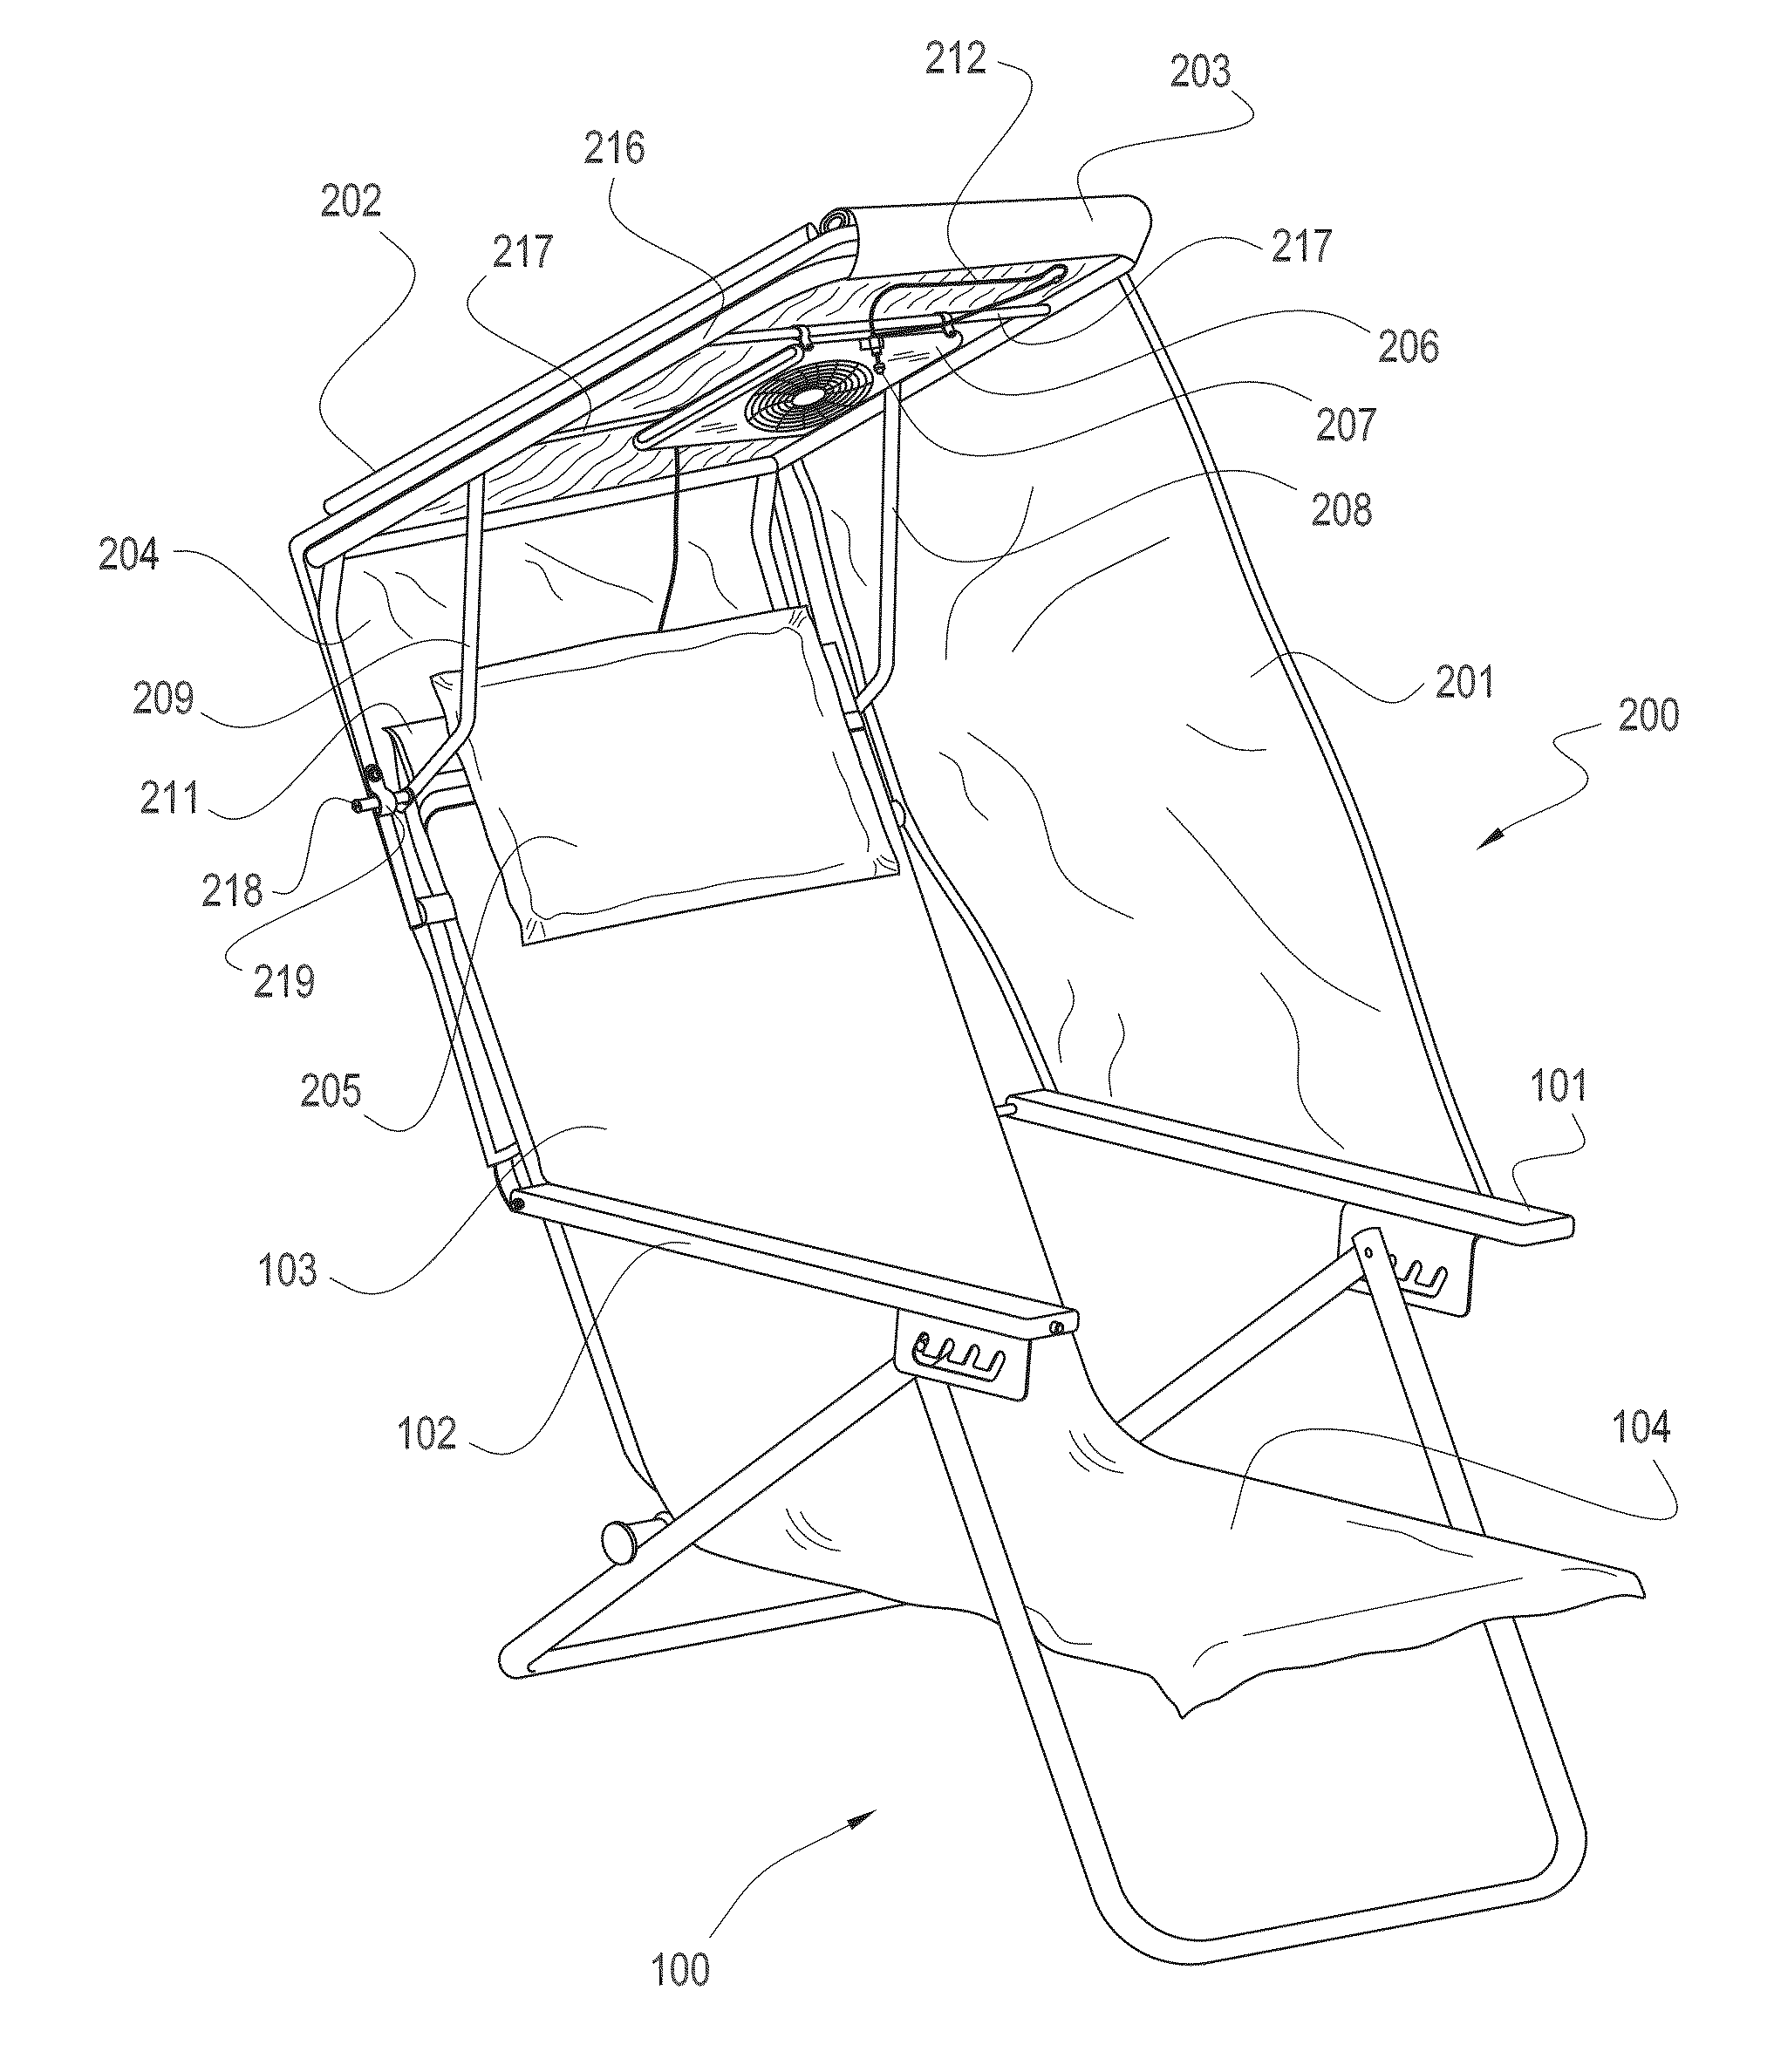 Portable Cooling Chamber Having Radiant Barrier and Cooling System